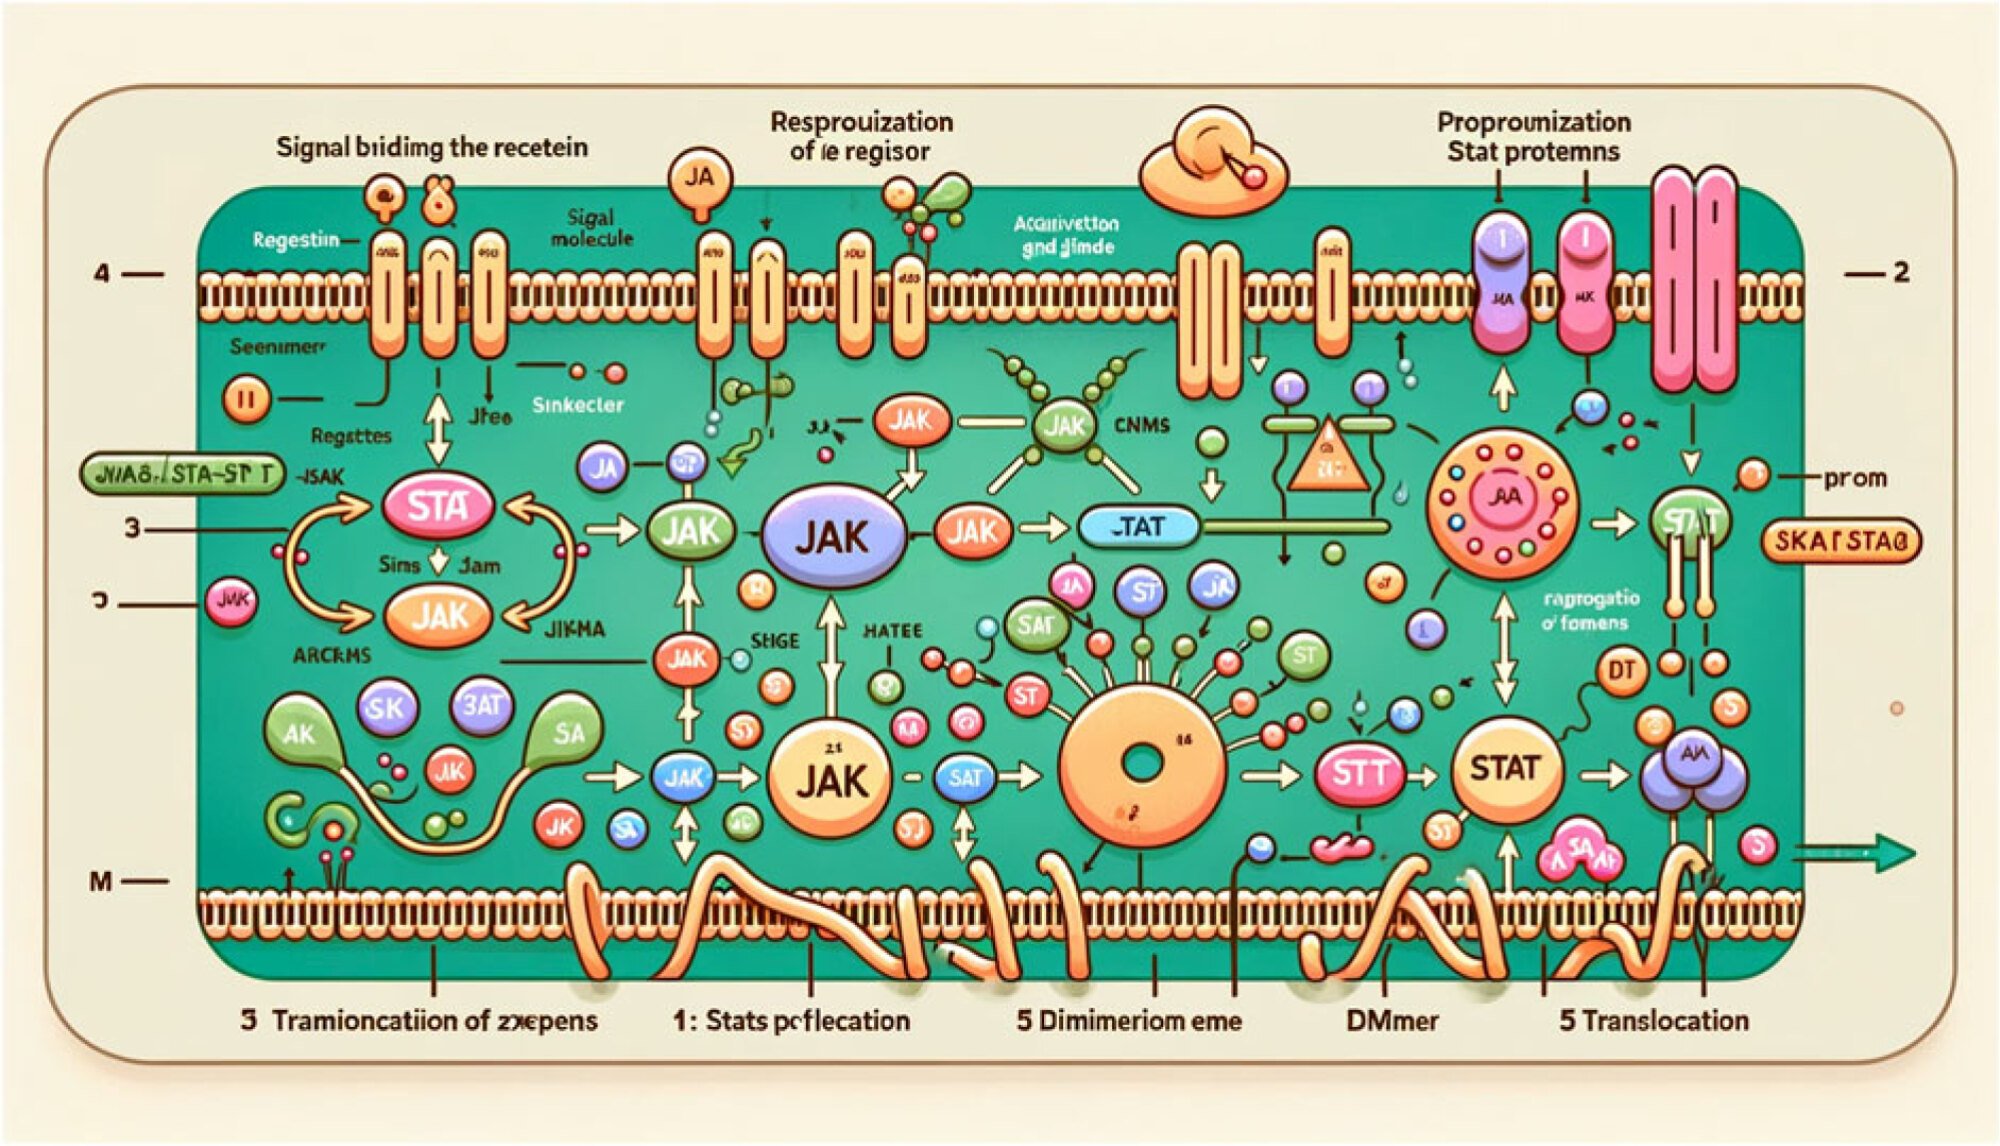 A nonsensical AI-generated scientific diagram that ostensibly shows the JAK-STAT signaling pathway.